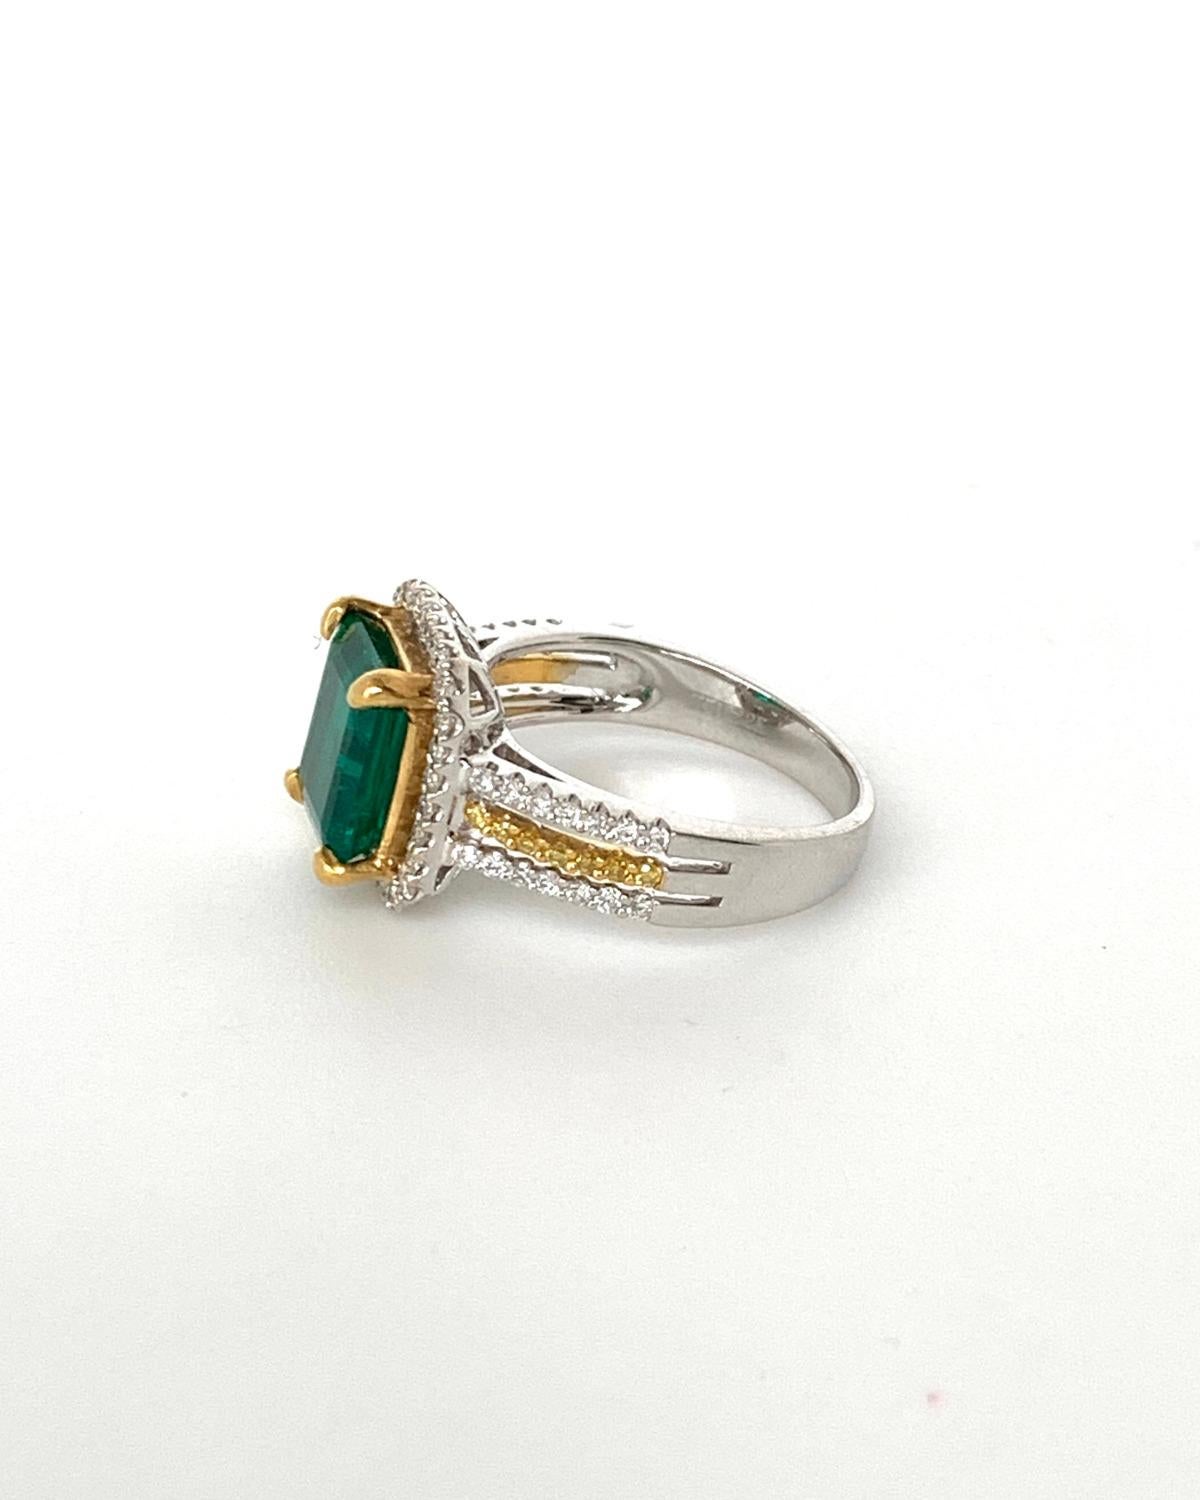 2.85 Carat Emerald Cocktail Ring with Canary and White Diamonds in 18k Gold In New Condition For Sale In Los Angeles, CA